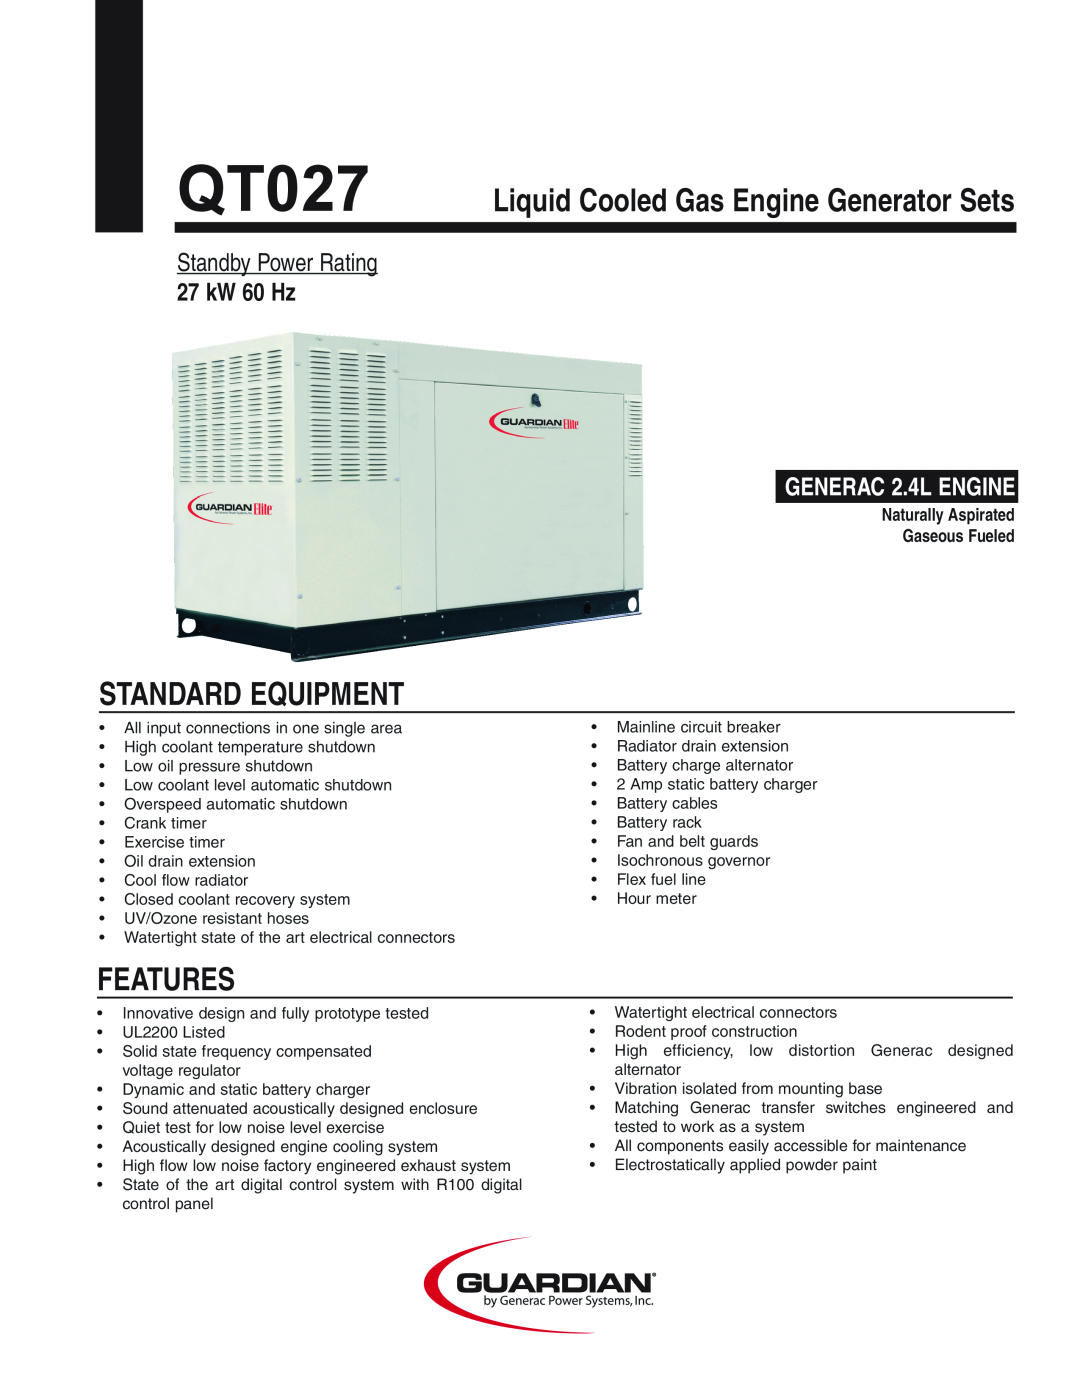 Guardian Technologies QT027 manual Standard Equipment, Features, Naturally Aspirated Gaseous Fueled, Standby Power Rating 